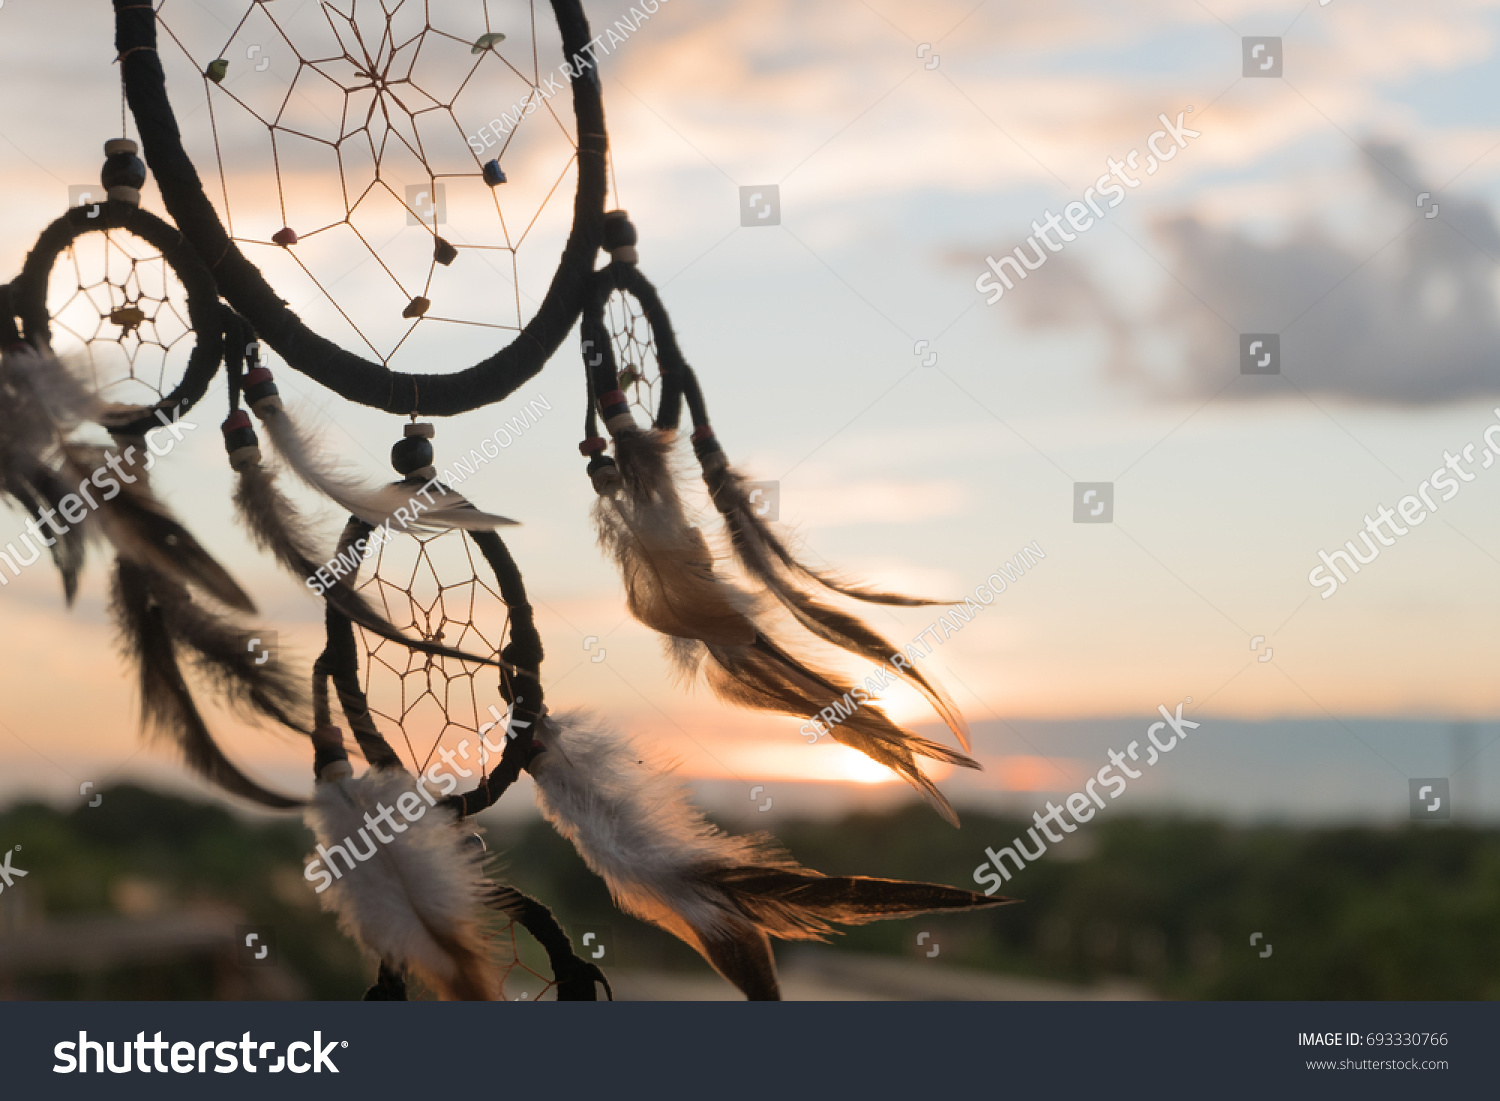 Dream Catcher on the sunset background #693330766